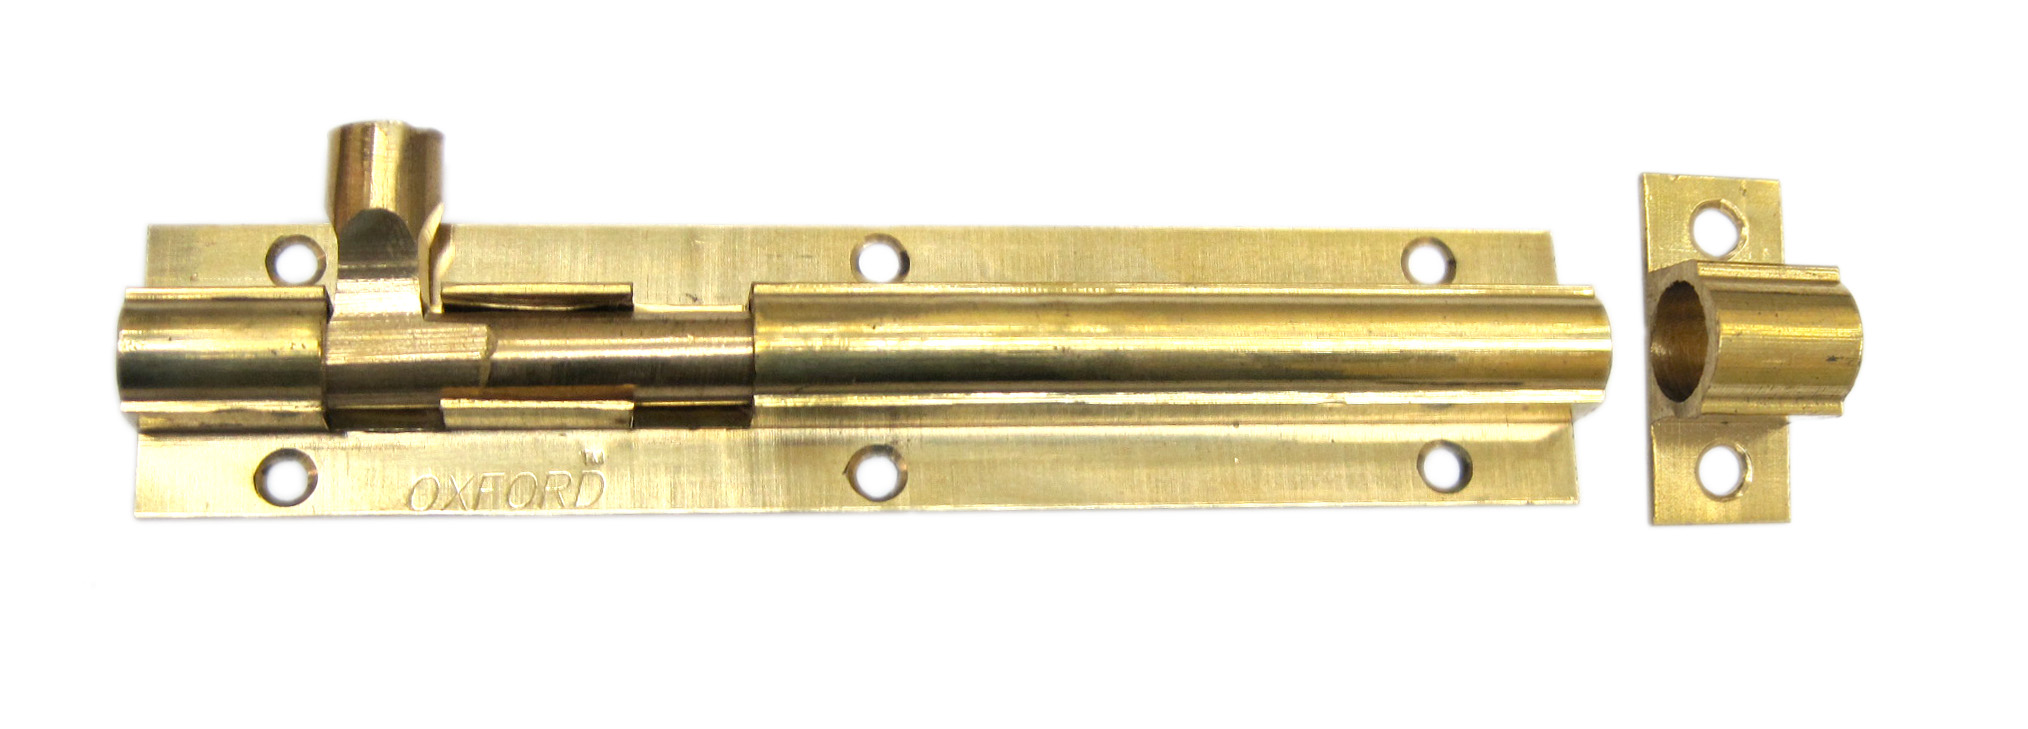 BRASS TOWER BOLT 3/8X4 In CO01